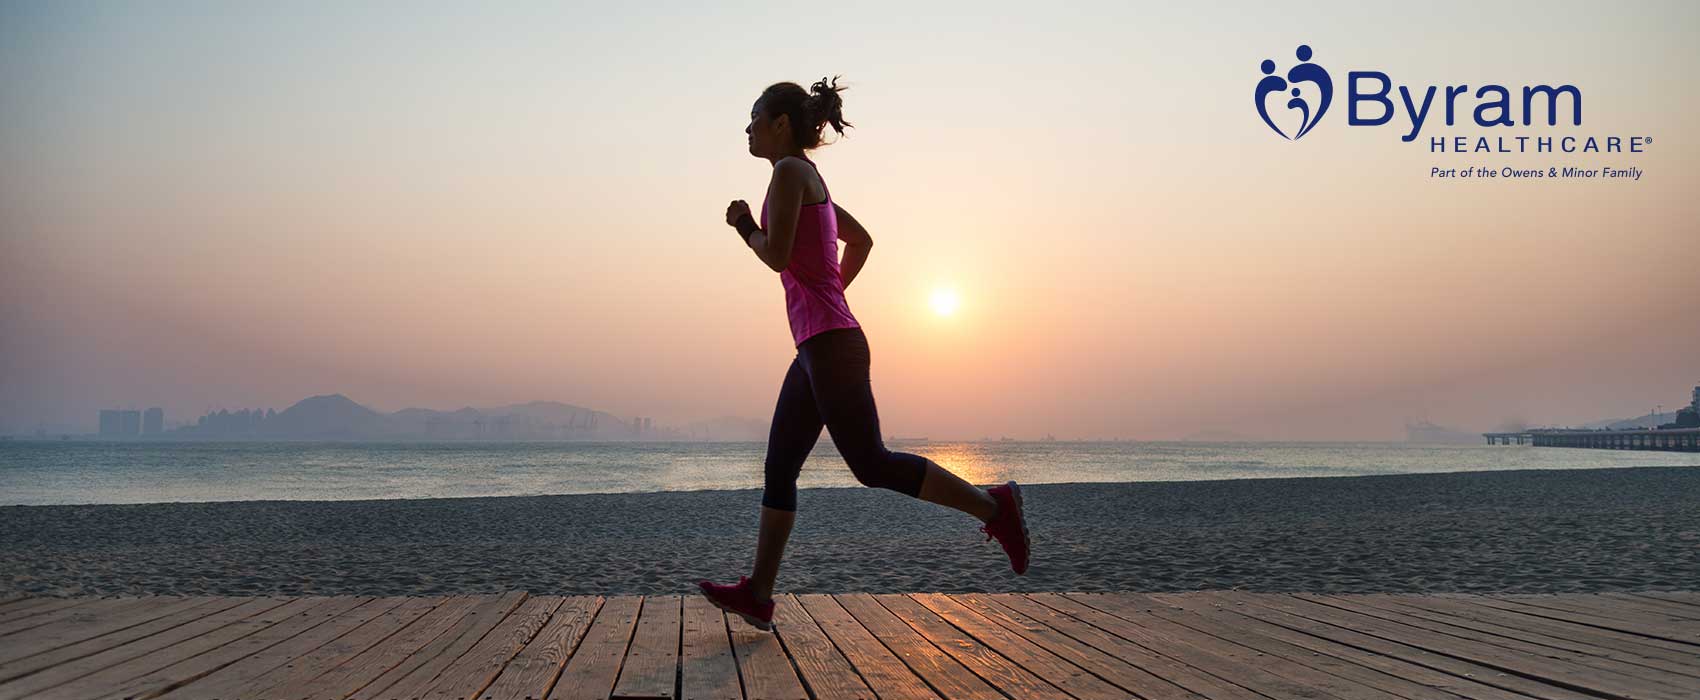 Woman jogging on a boardwalk during sunset.